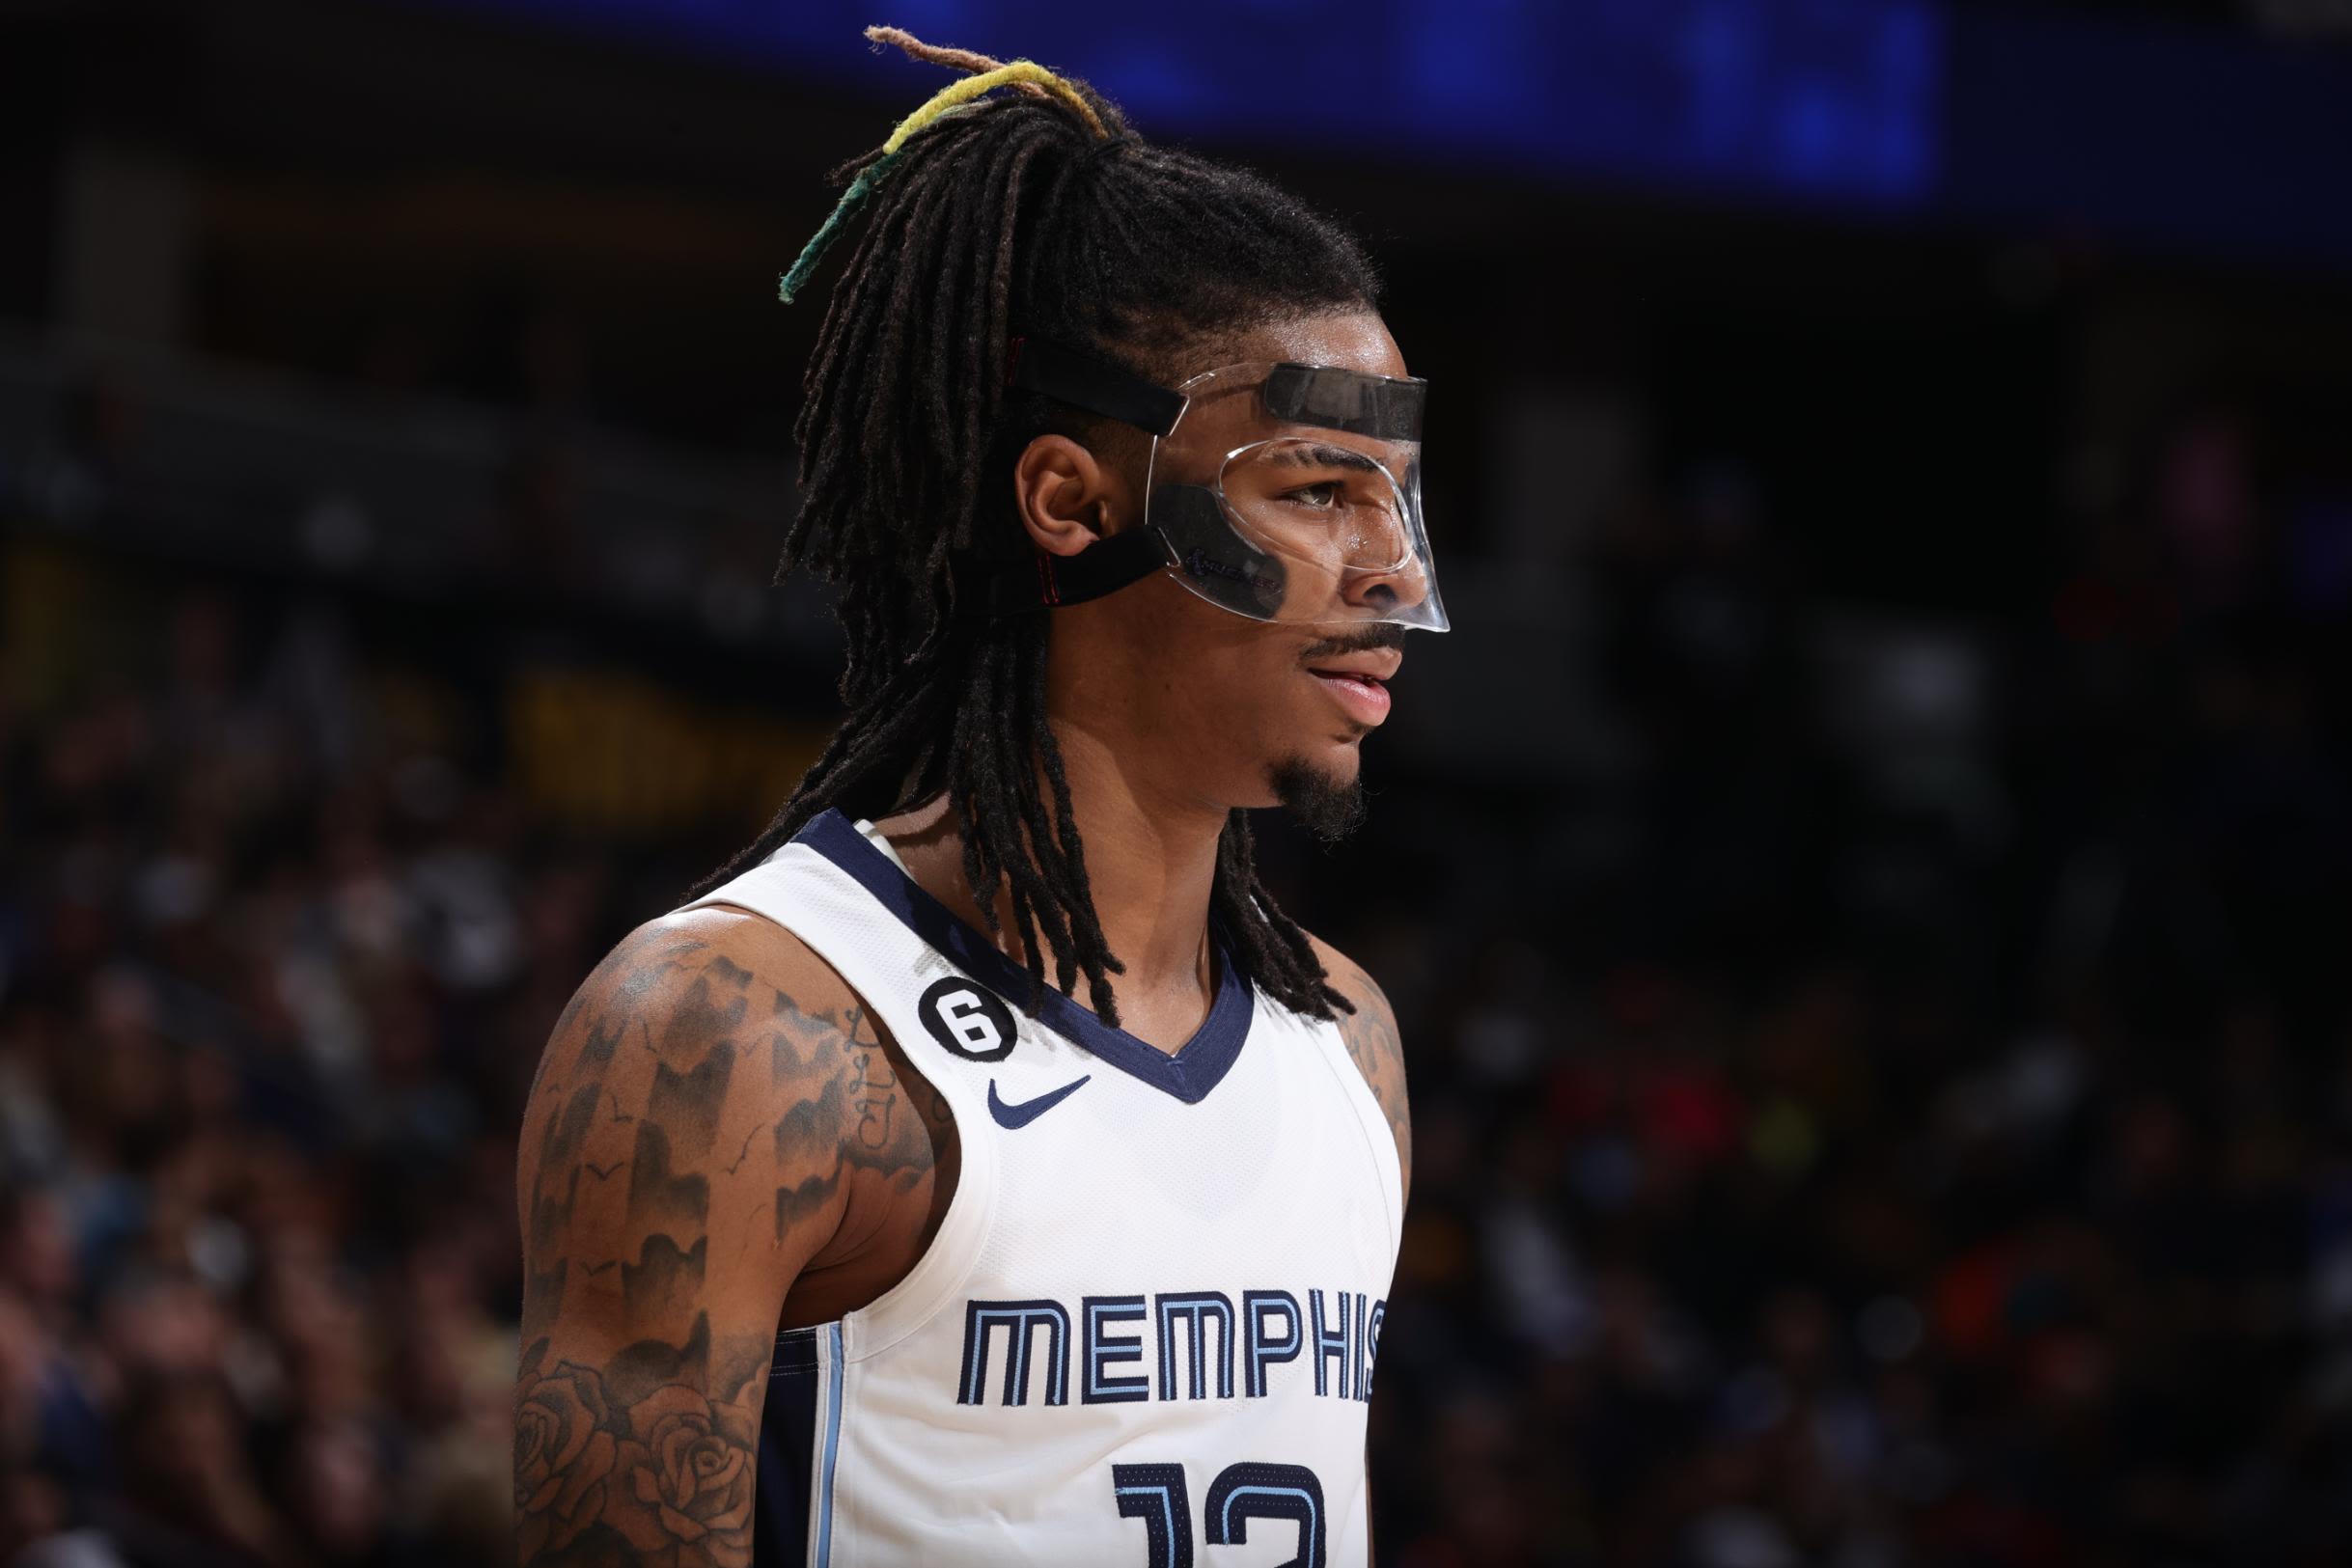 NBA Player Ja Morant Issues Apology After Showing Gun on Instagram